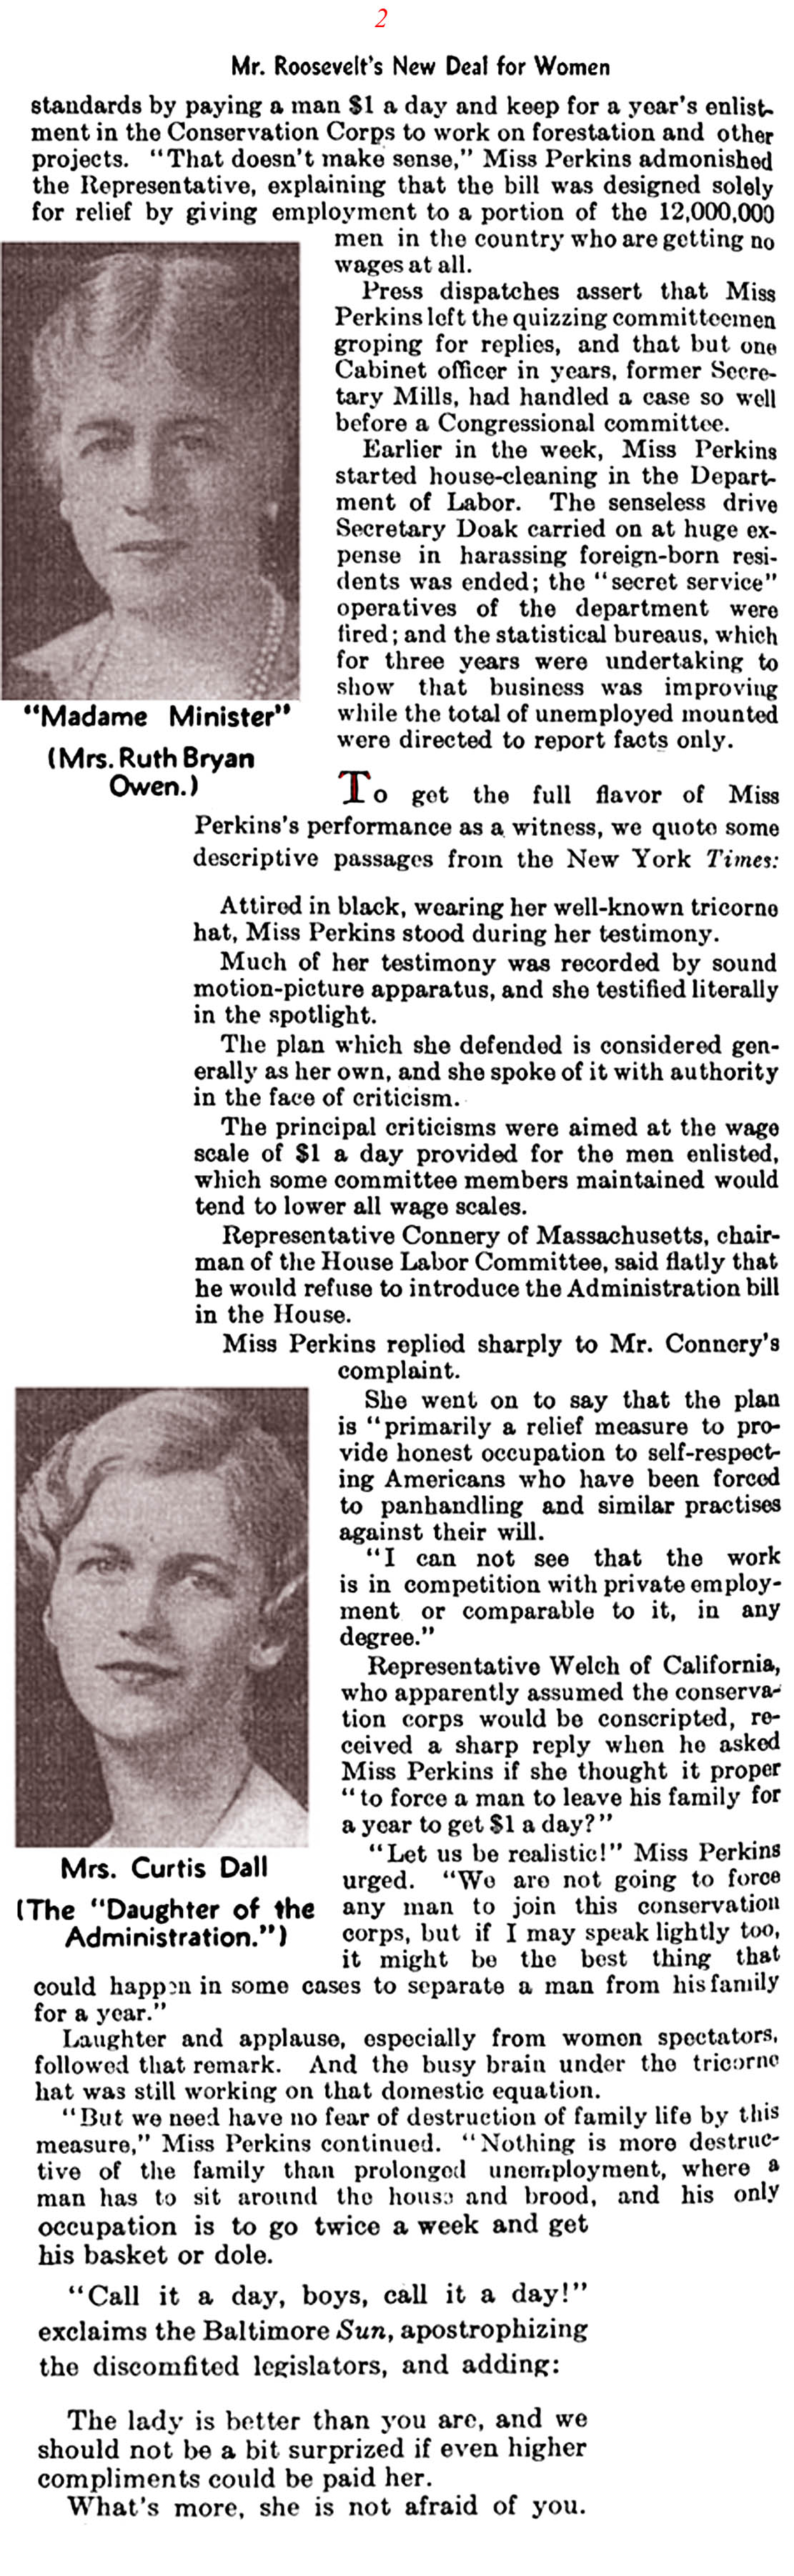 A New Deal for Women (The Literary Digest, 1933)